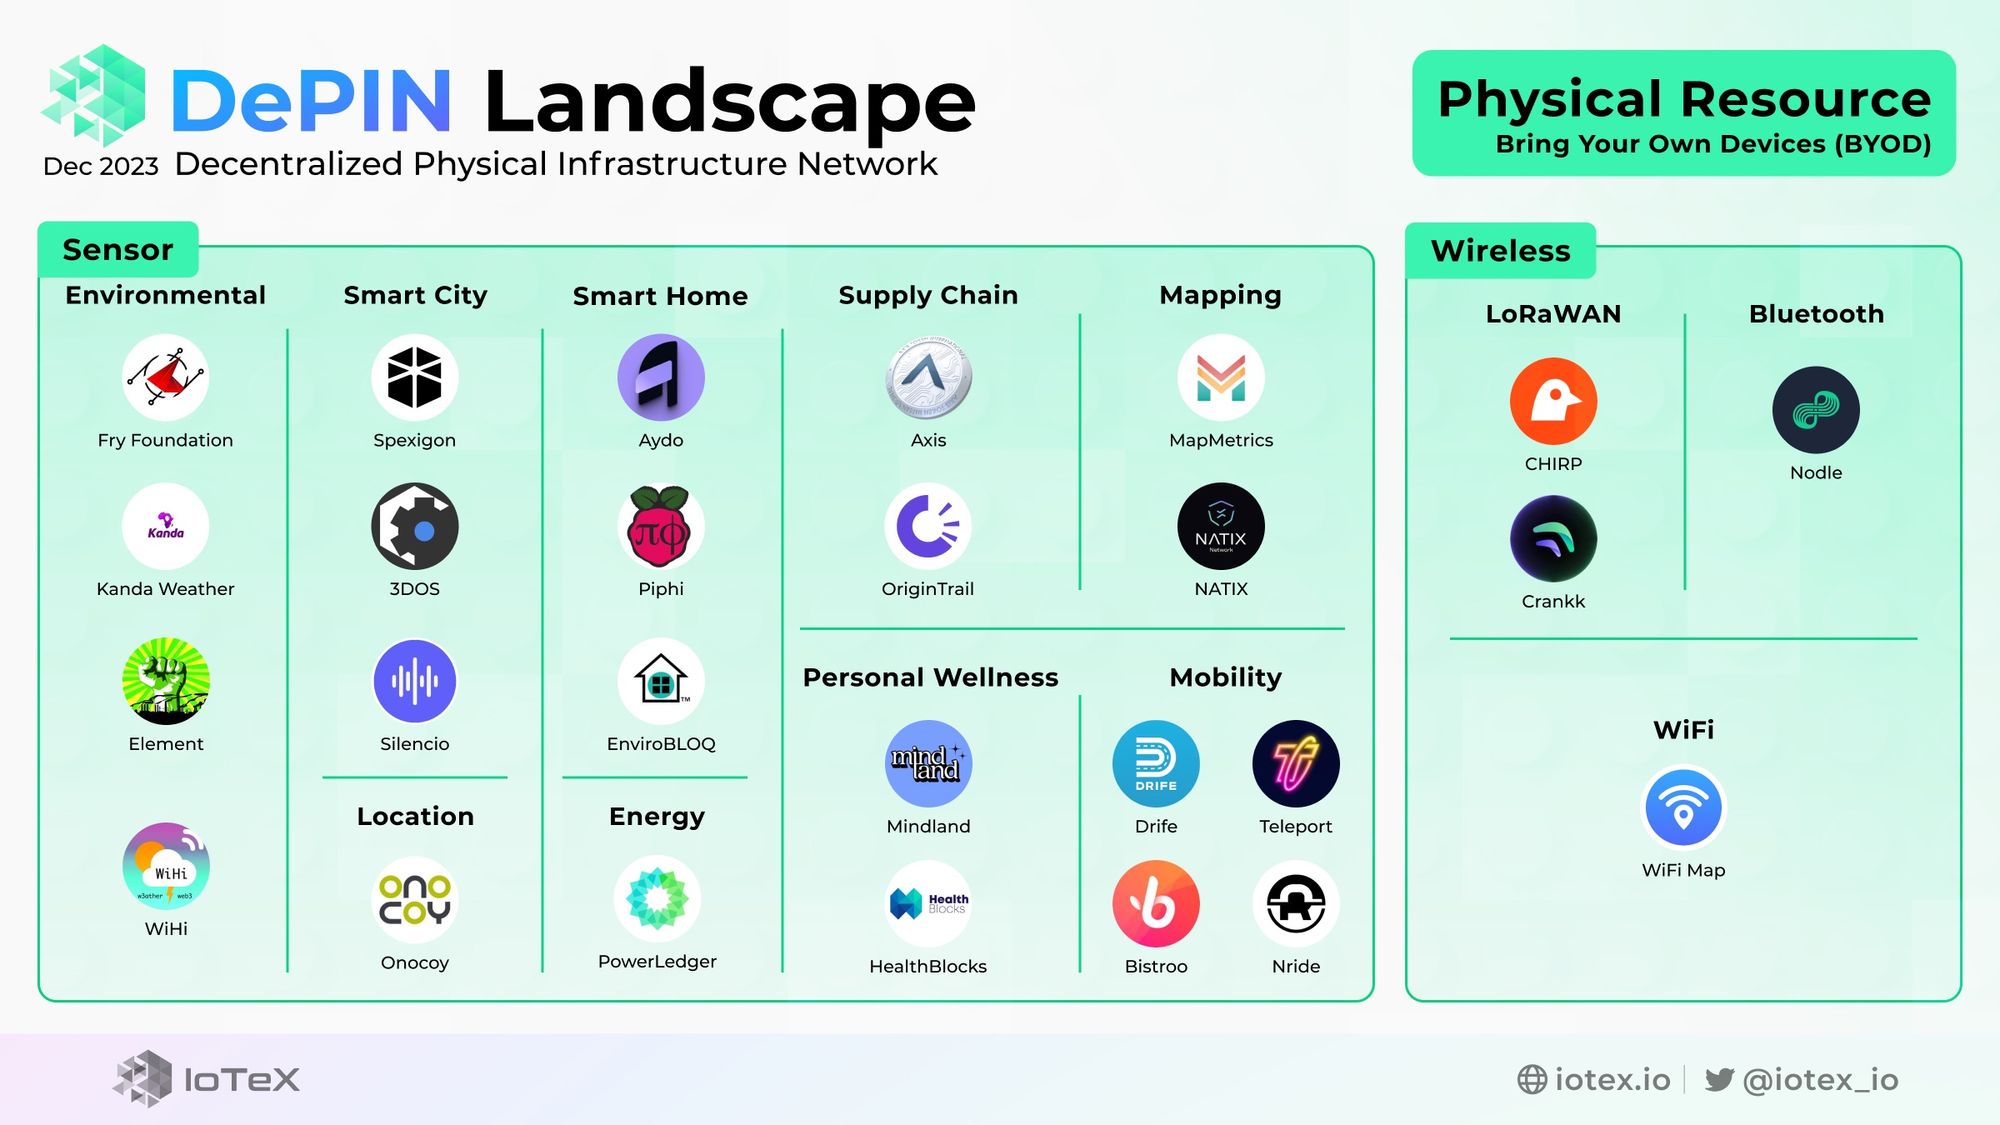 DePIN Landscape, Physical Resource Networks, Bring Your Own Devices (BYOD), IoTeX, DePIN